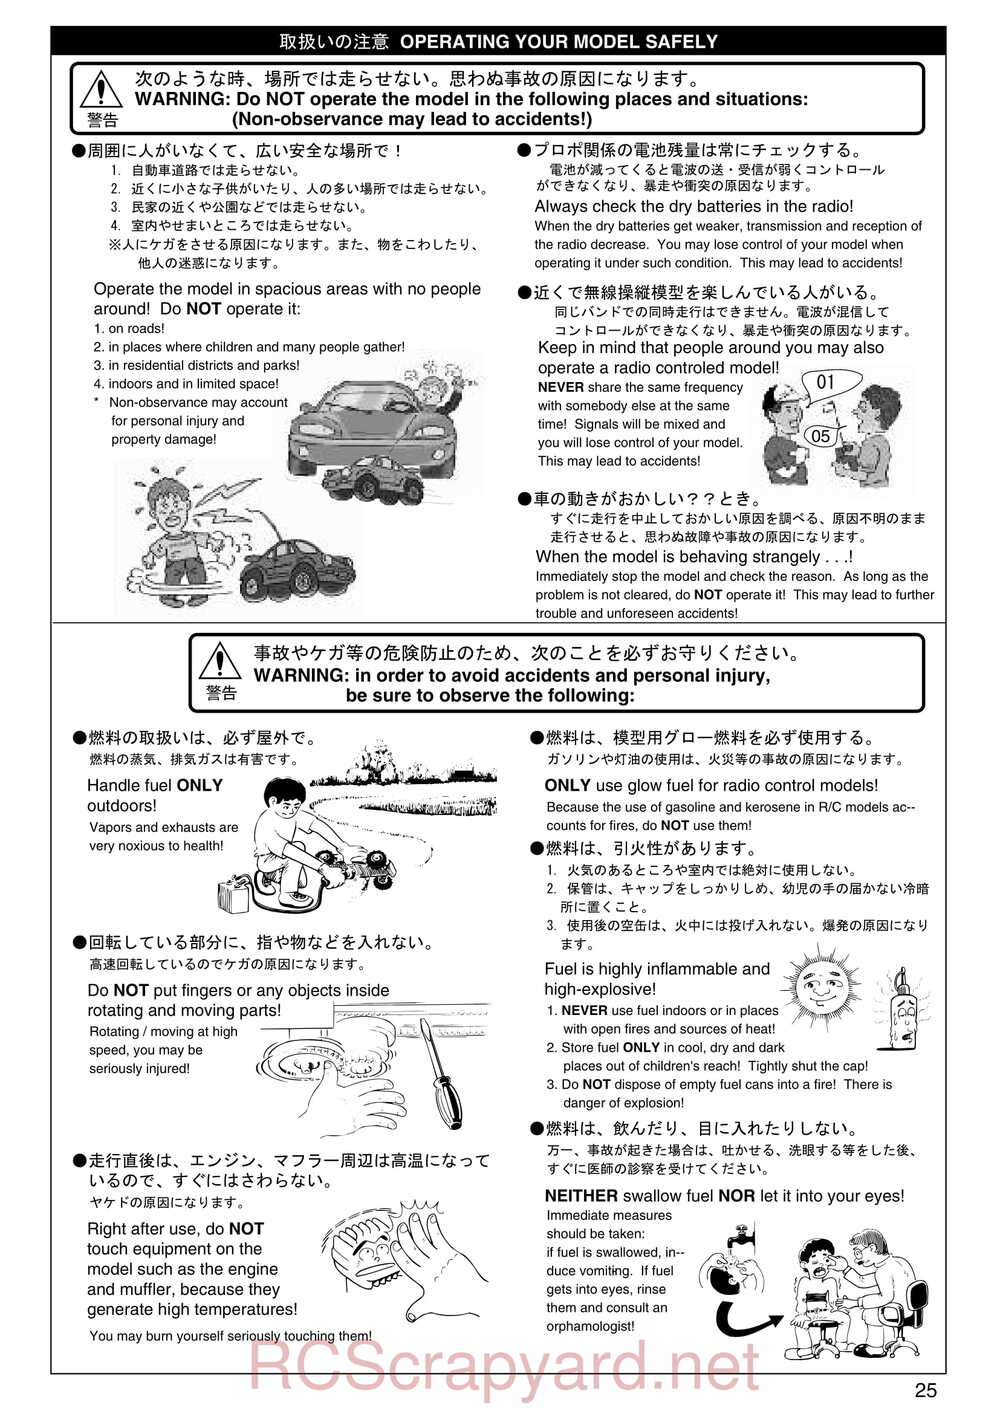 Kyosho - 31213 - TR-15 Monster-Touring - Manual - Page 25